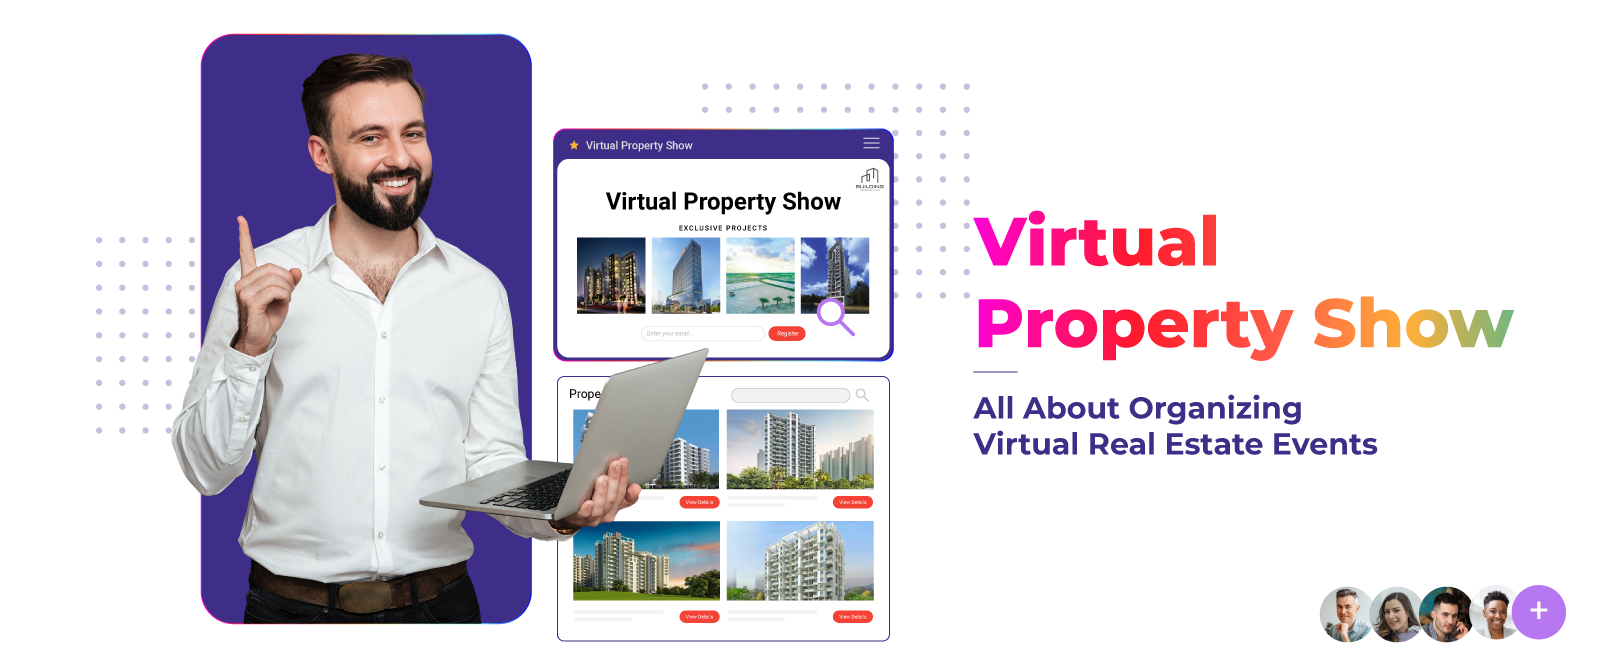 Virtual Property Show – All About Organizing Virtual Real Estate Events